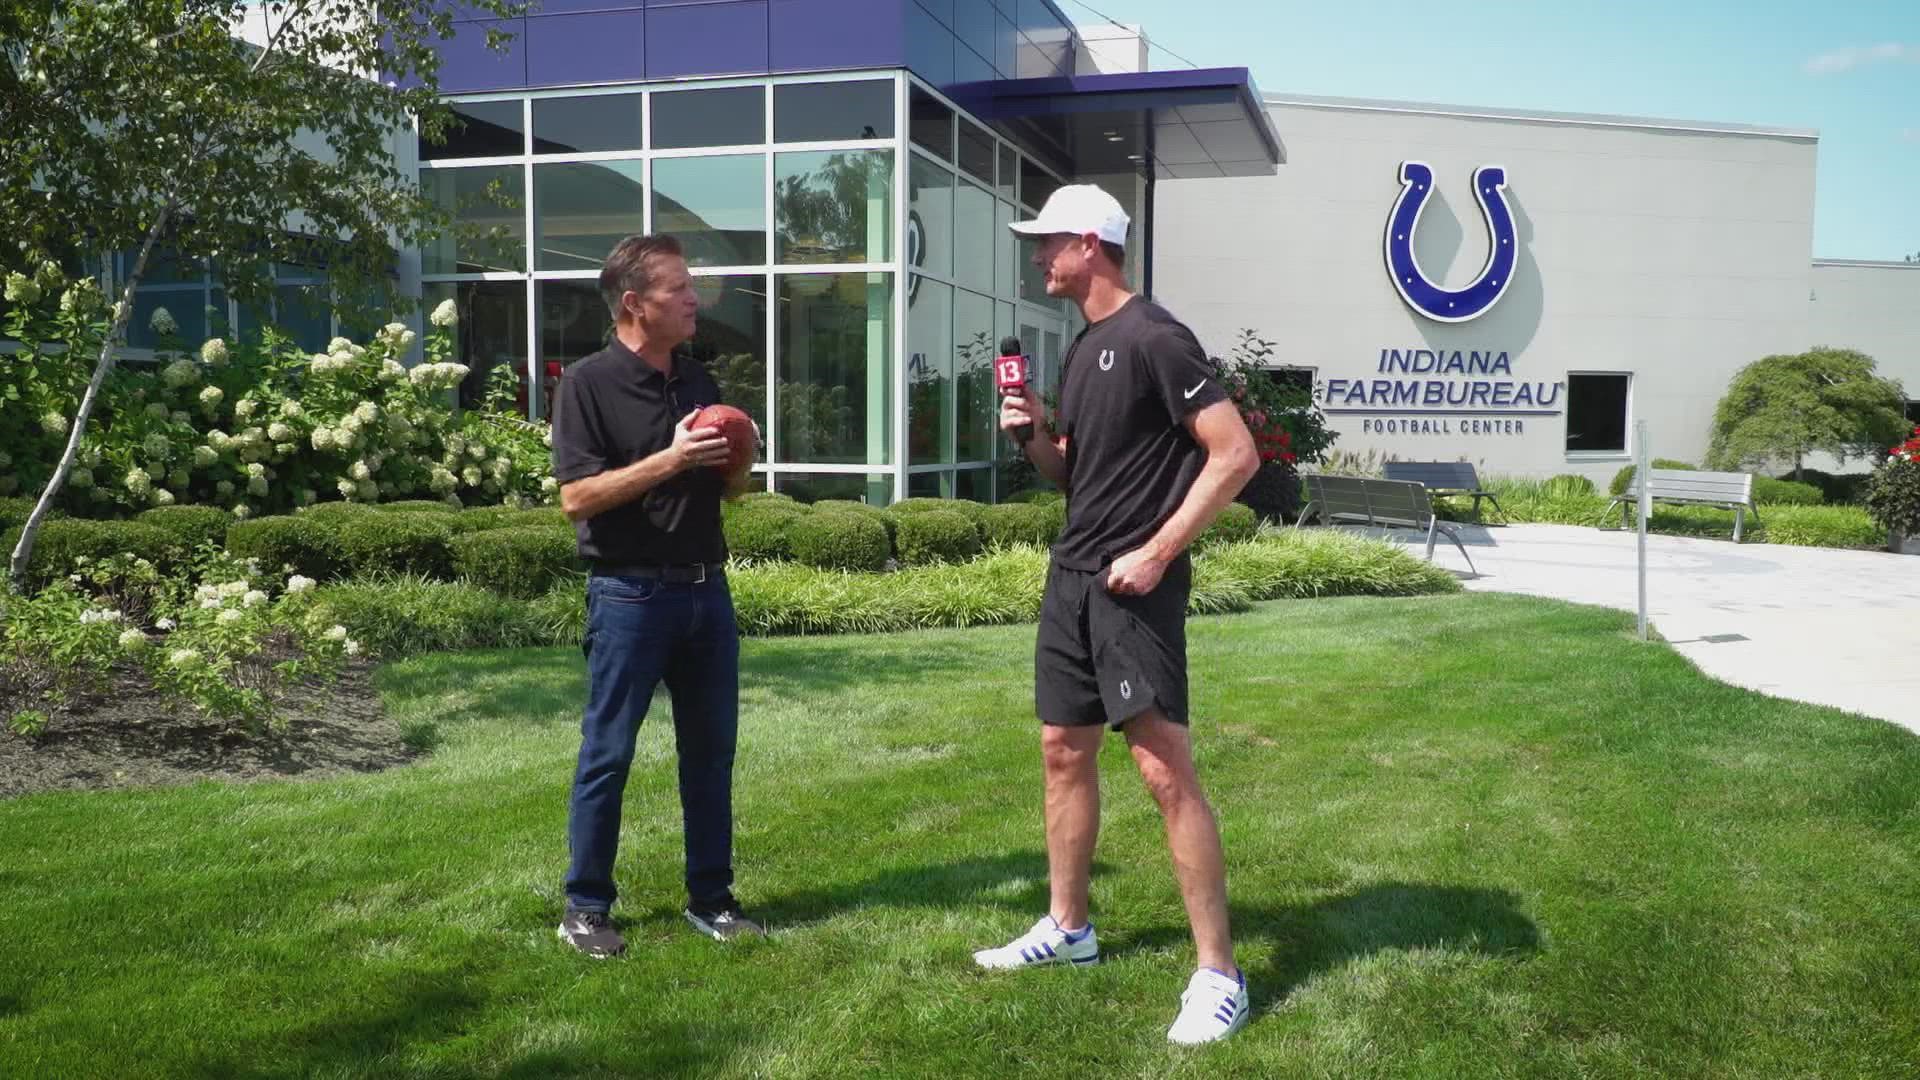 Colts quarterback Matt Ryan joins 13Sports Director Dave Calabro "Inside the Huddle" each Wednesday on 13News.